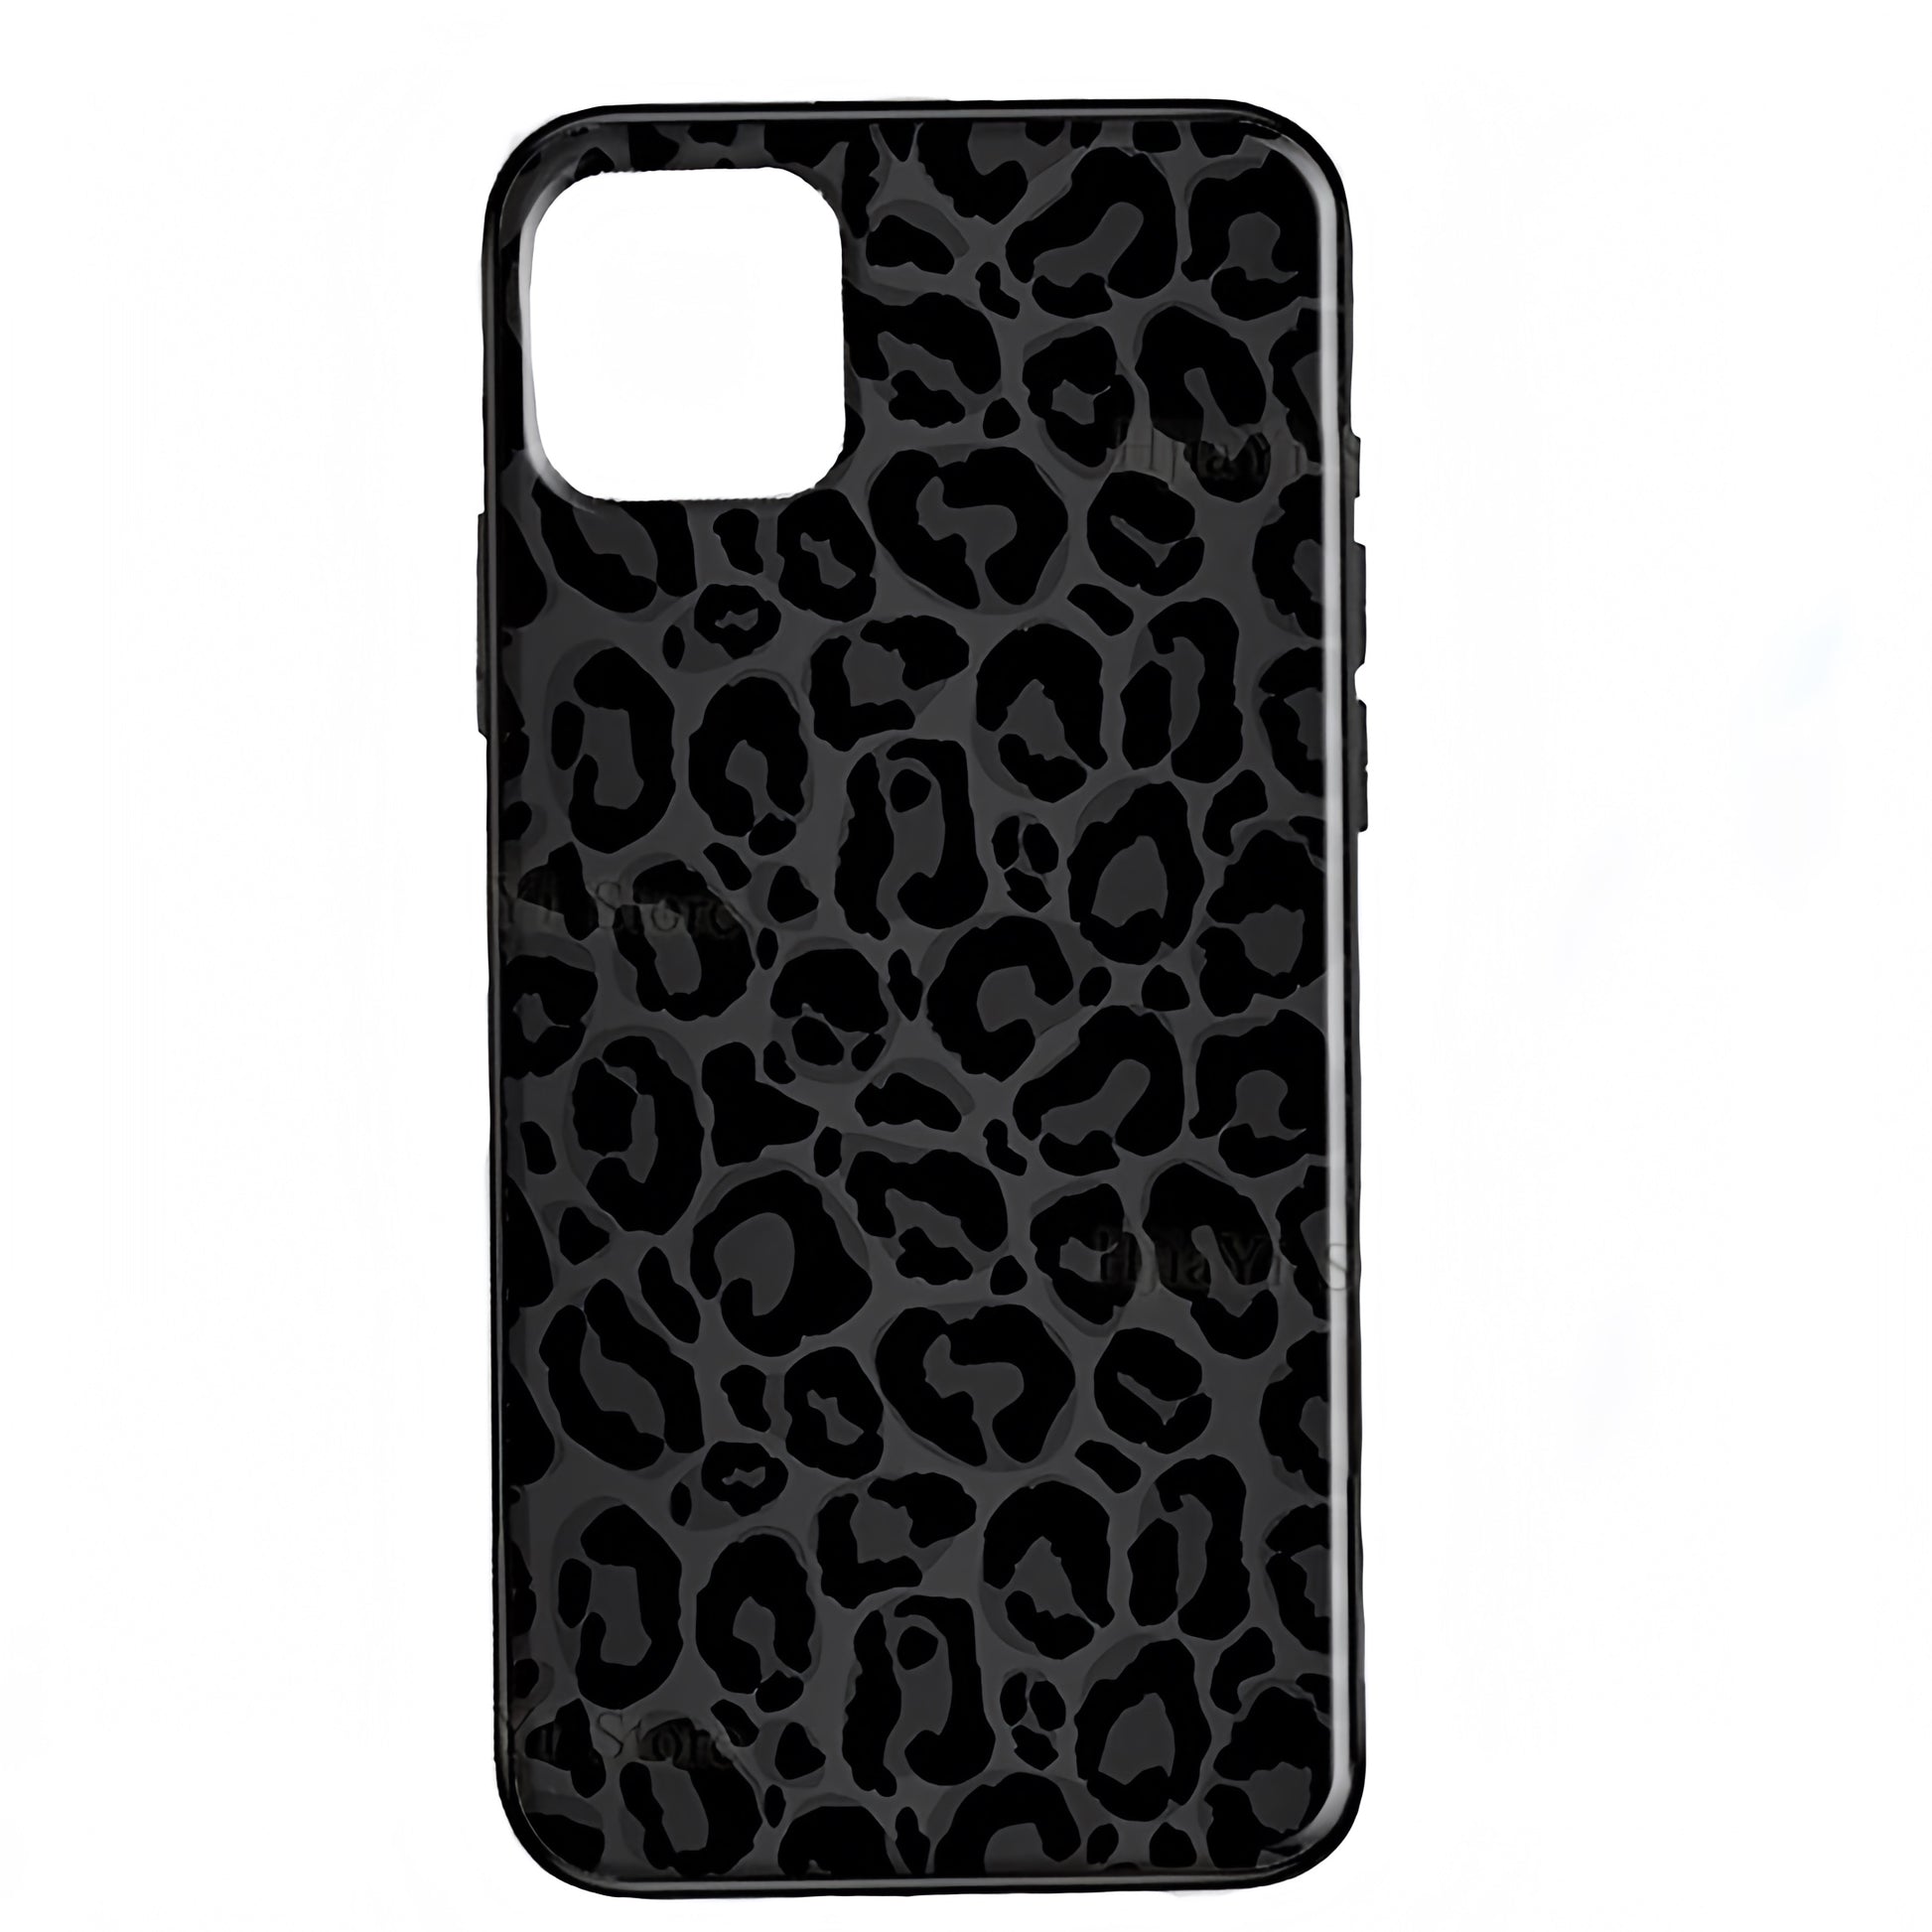 leopard-cheetah-animal-print-patterned-black-hard-plastic-shock-proof-high-quality-phone-case-for-iphone-chic-trendy-y2k-exotic-spring-2024-summer-wildflower-casetify-dupe